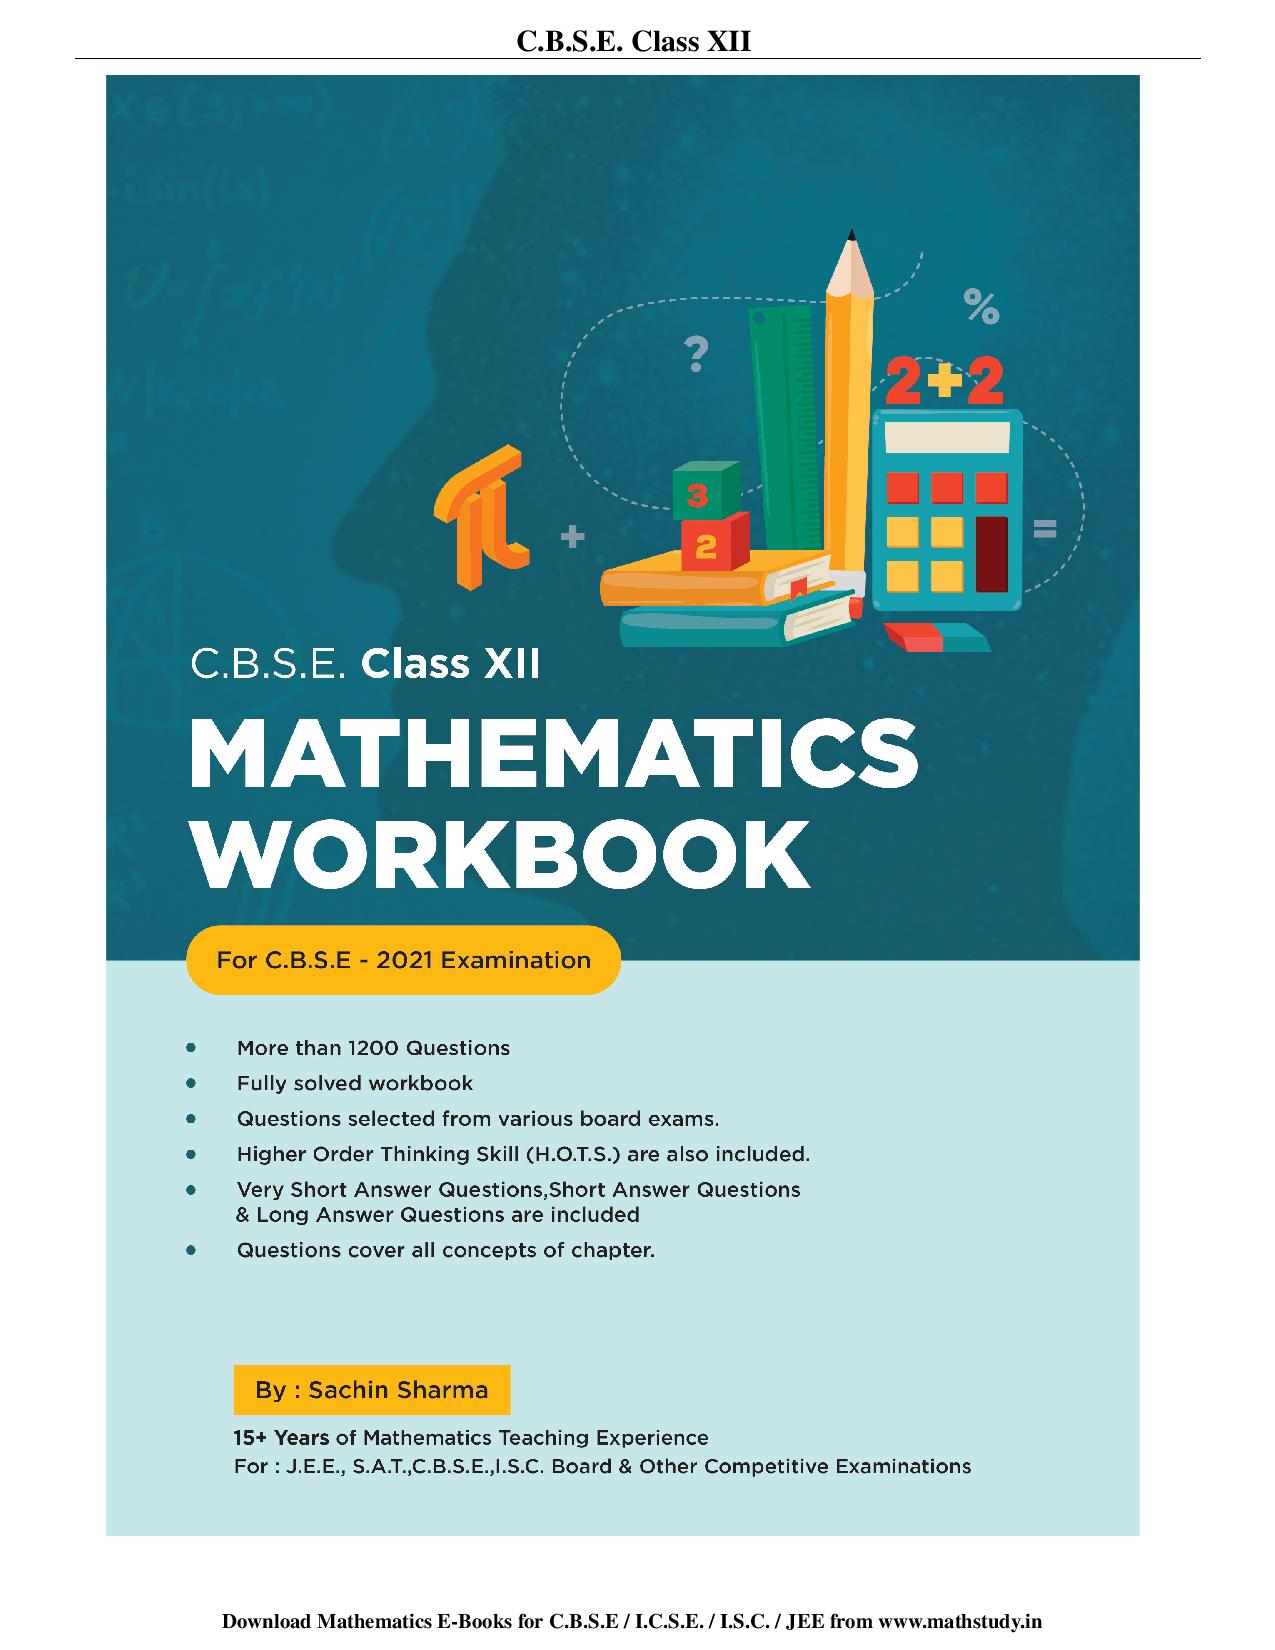 You are currently viewing class 12 workbook mathematics